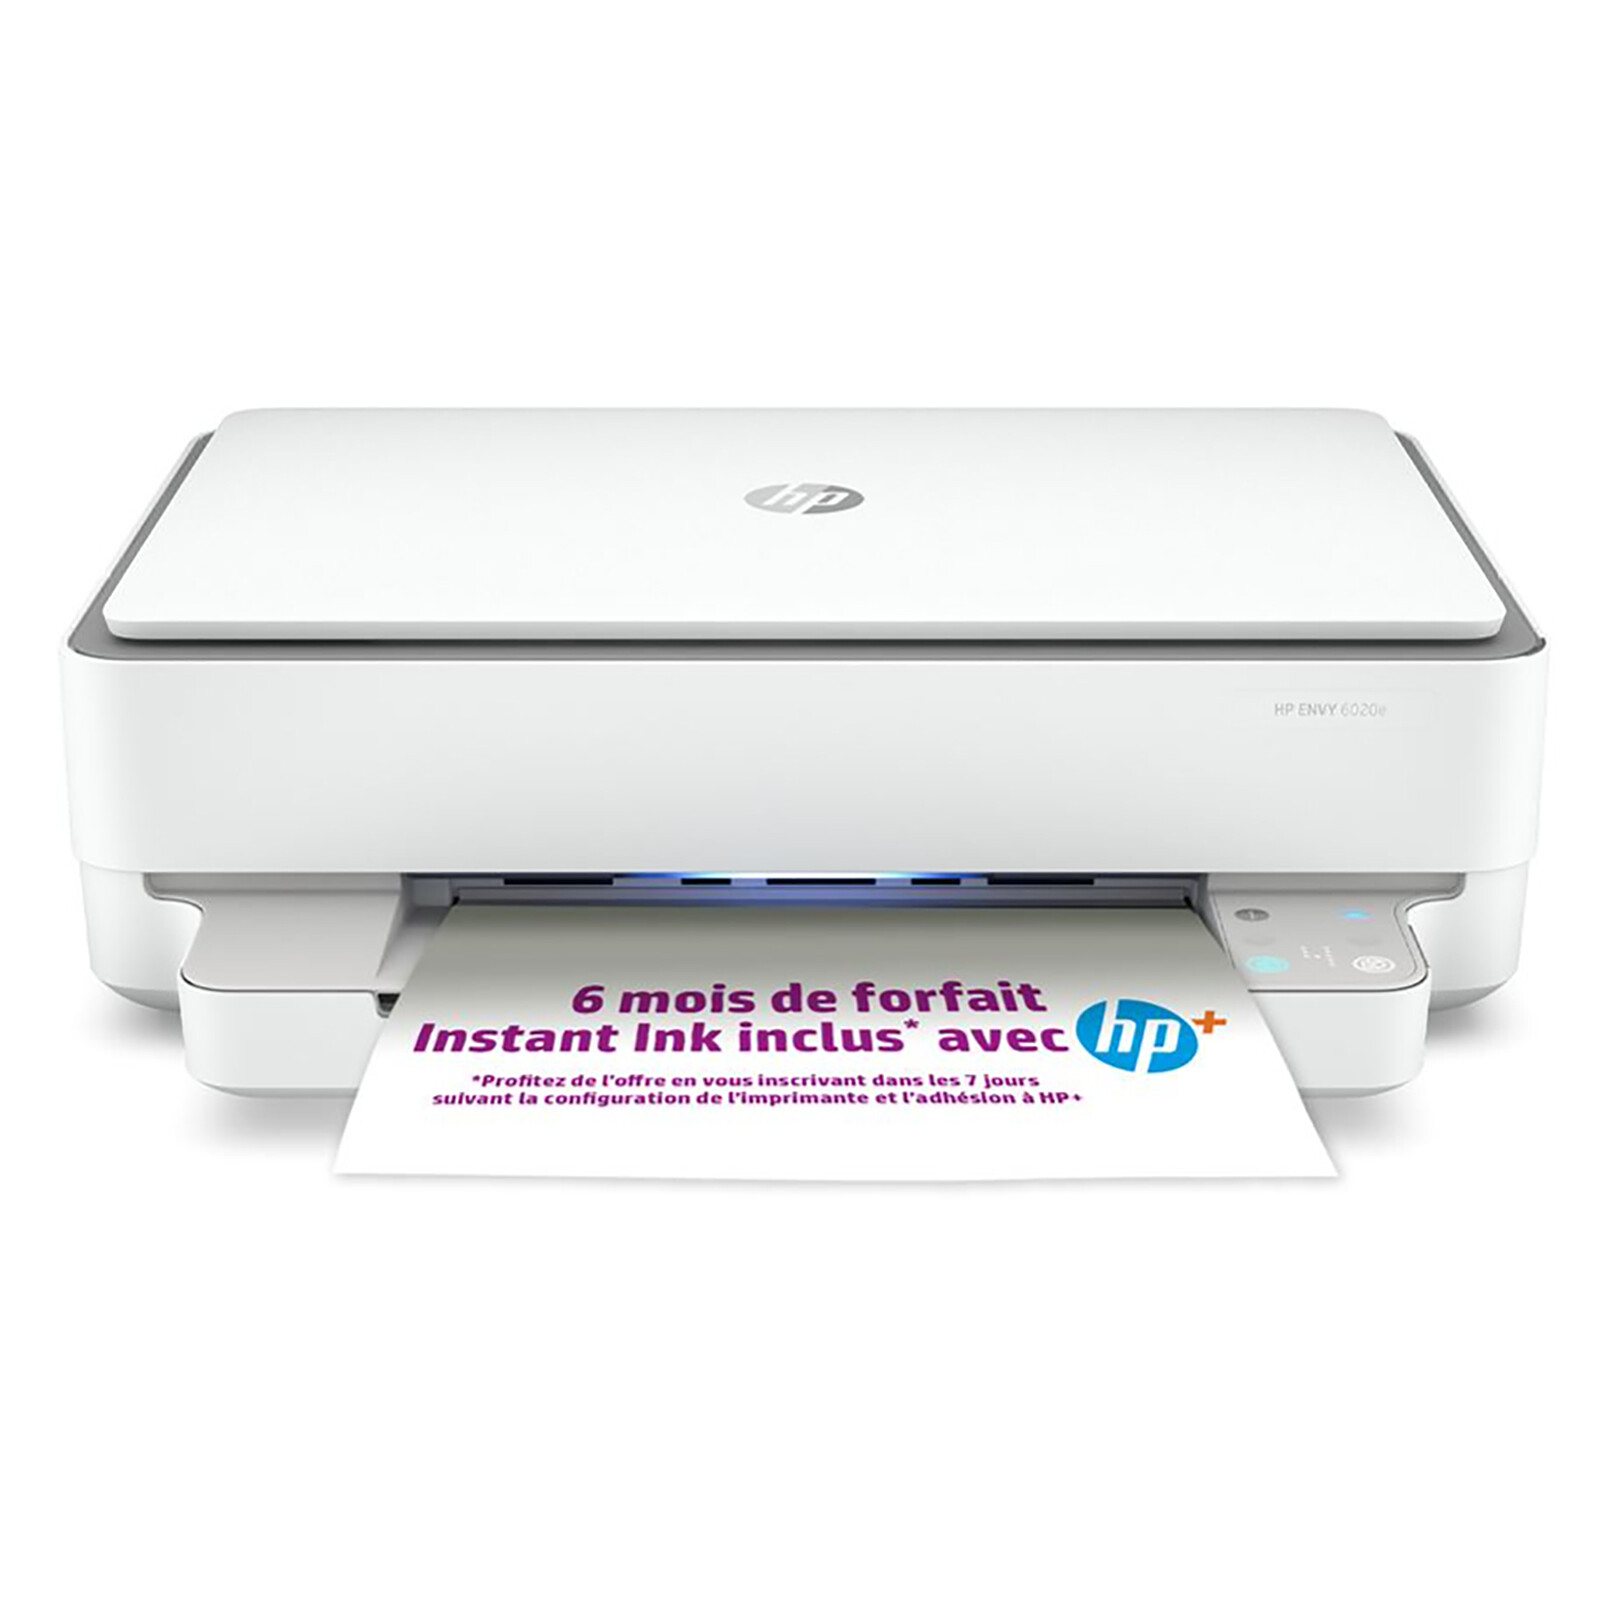 HP Envy 6020e All-In-One - All-in-one printer - LDLC 3-year